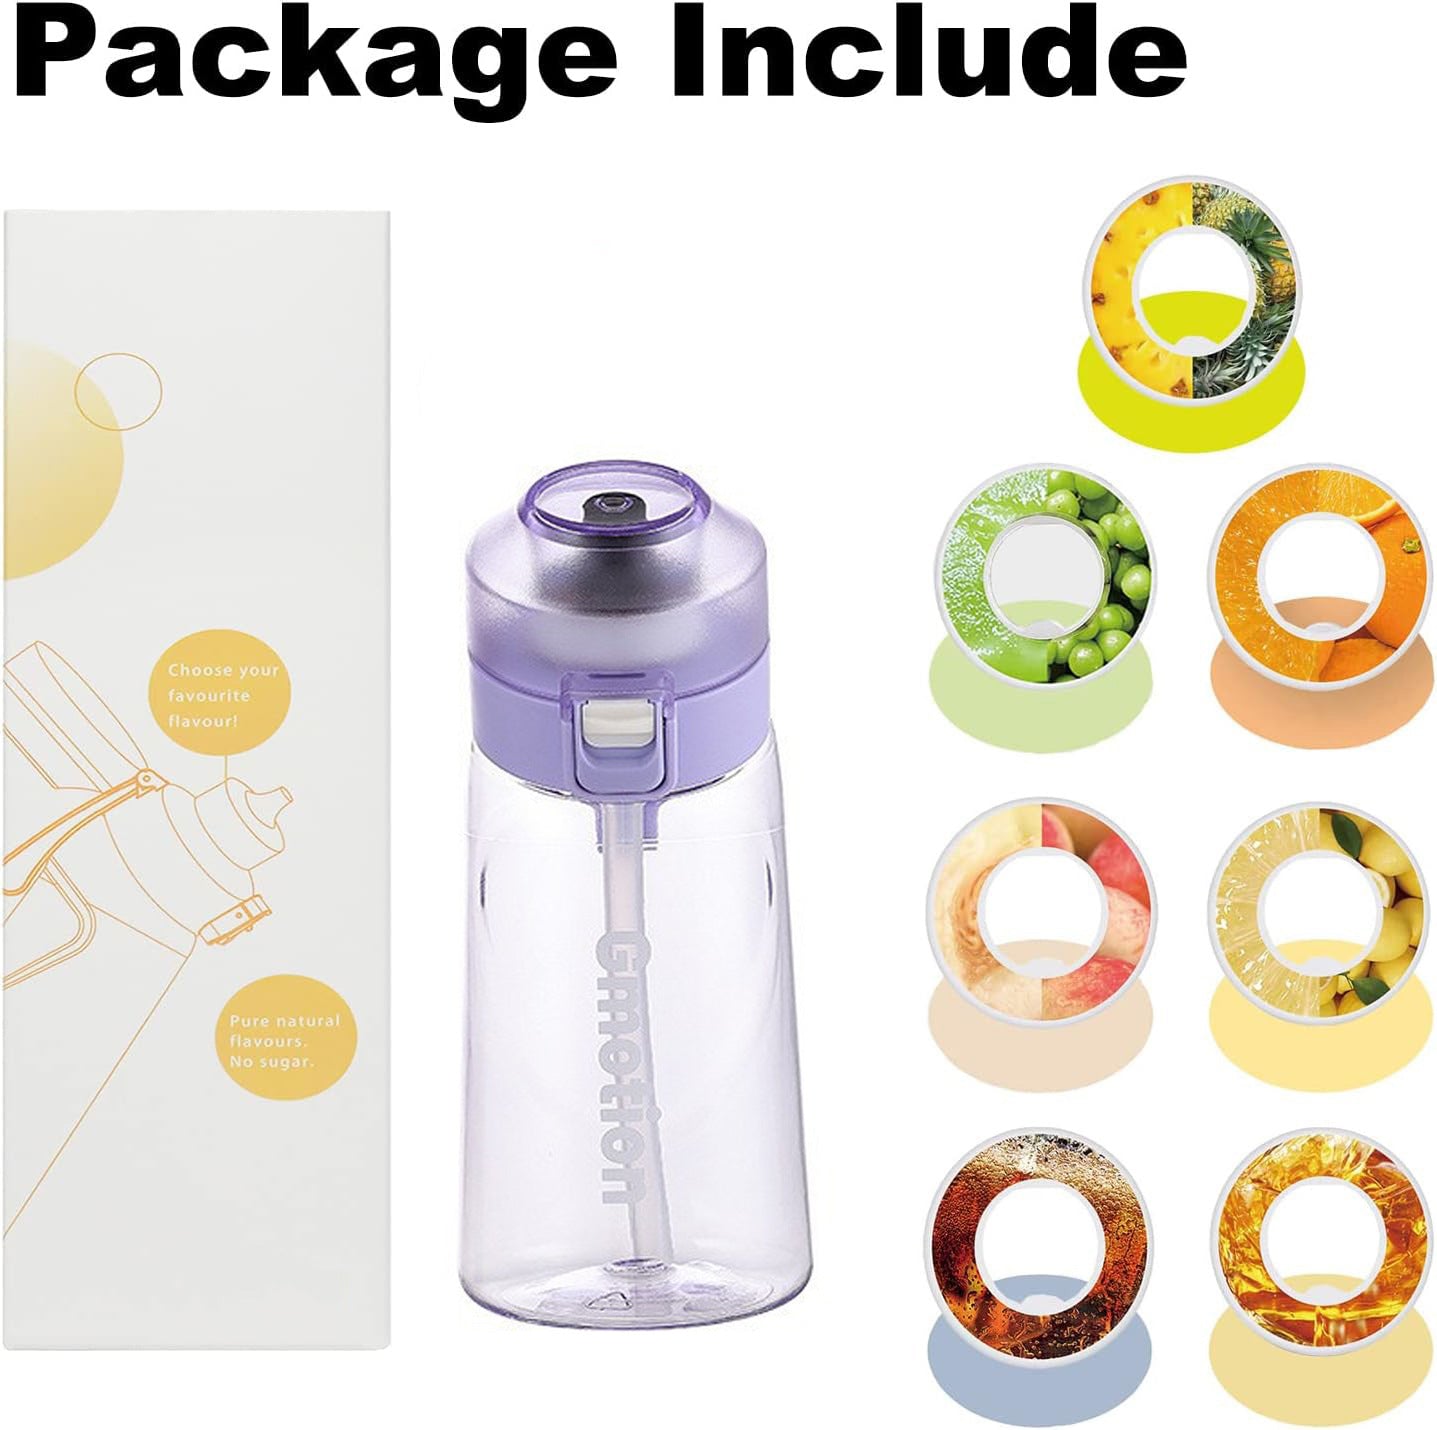 Transparent Fruit Fragrance Water Bottle with Flavor Pods,18.5 Oz/500ml,21.9 Oz/650ml Scent Sports Water Cup